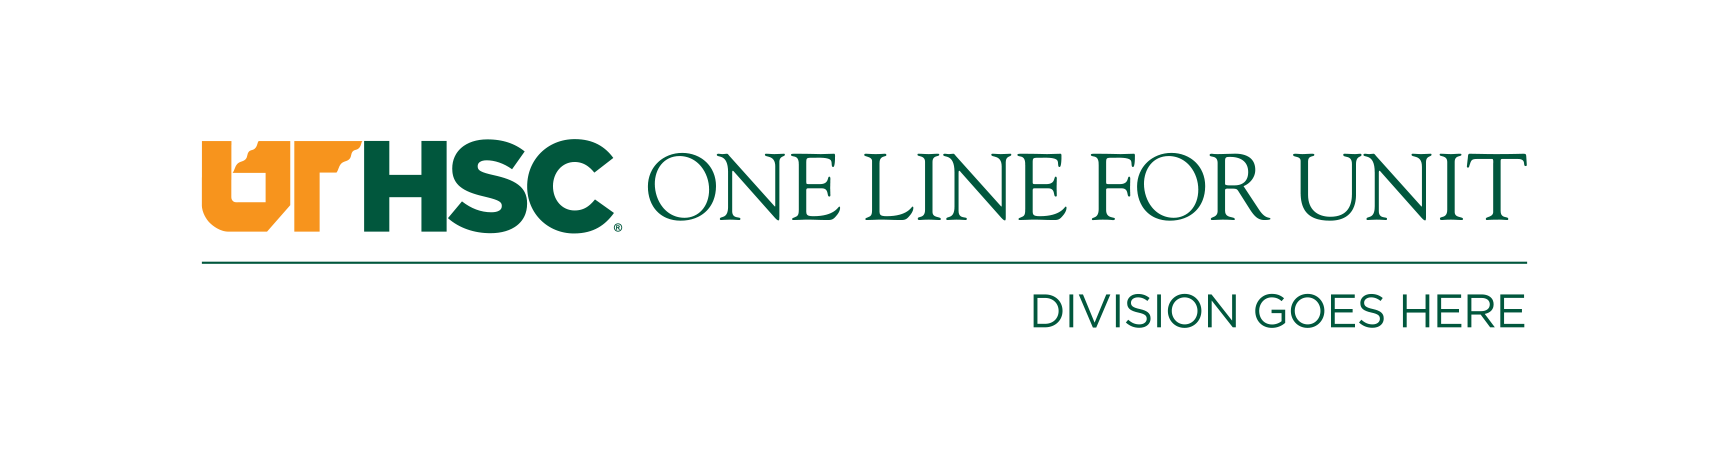 One line for unit line